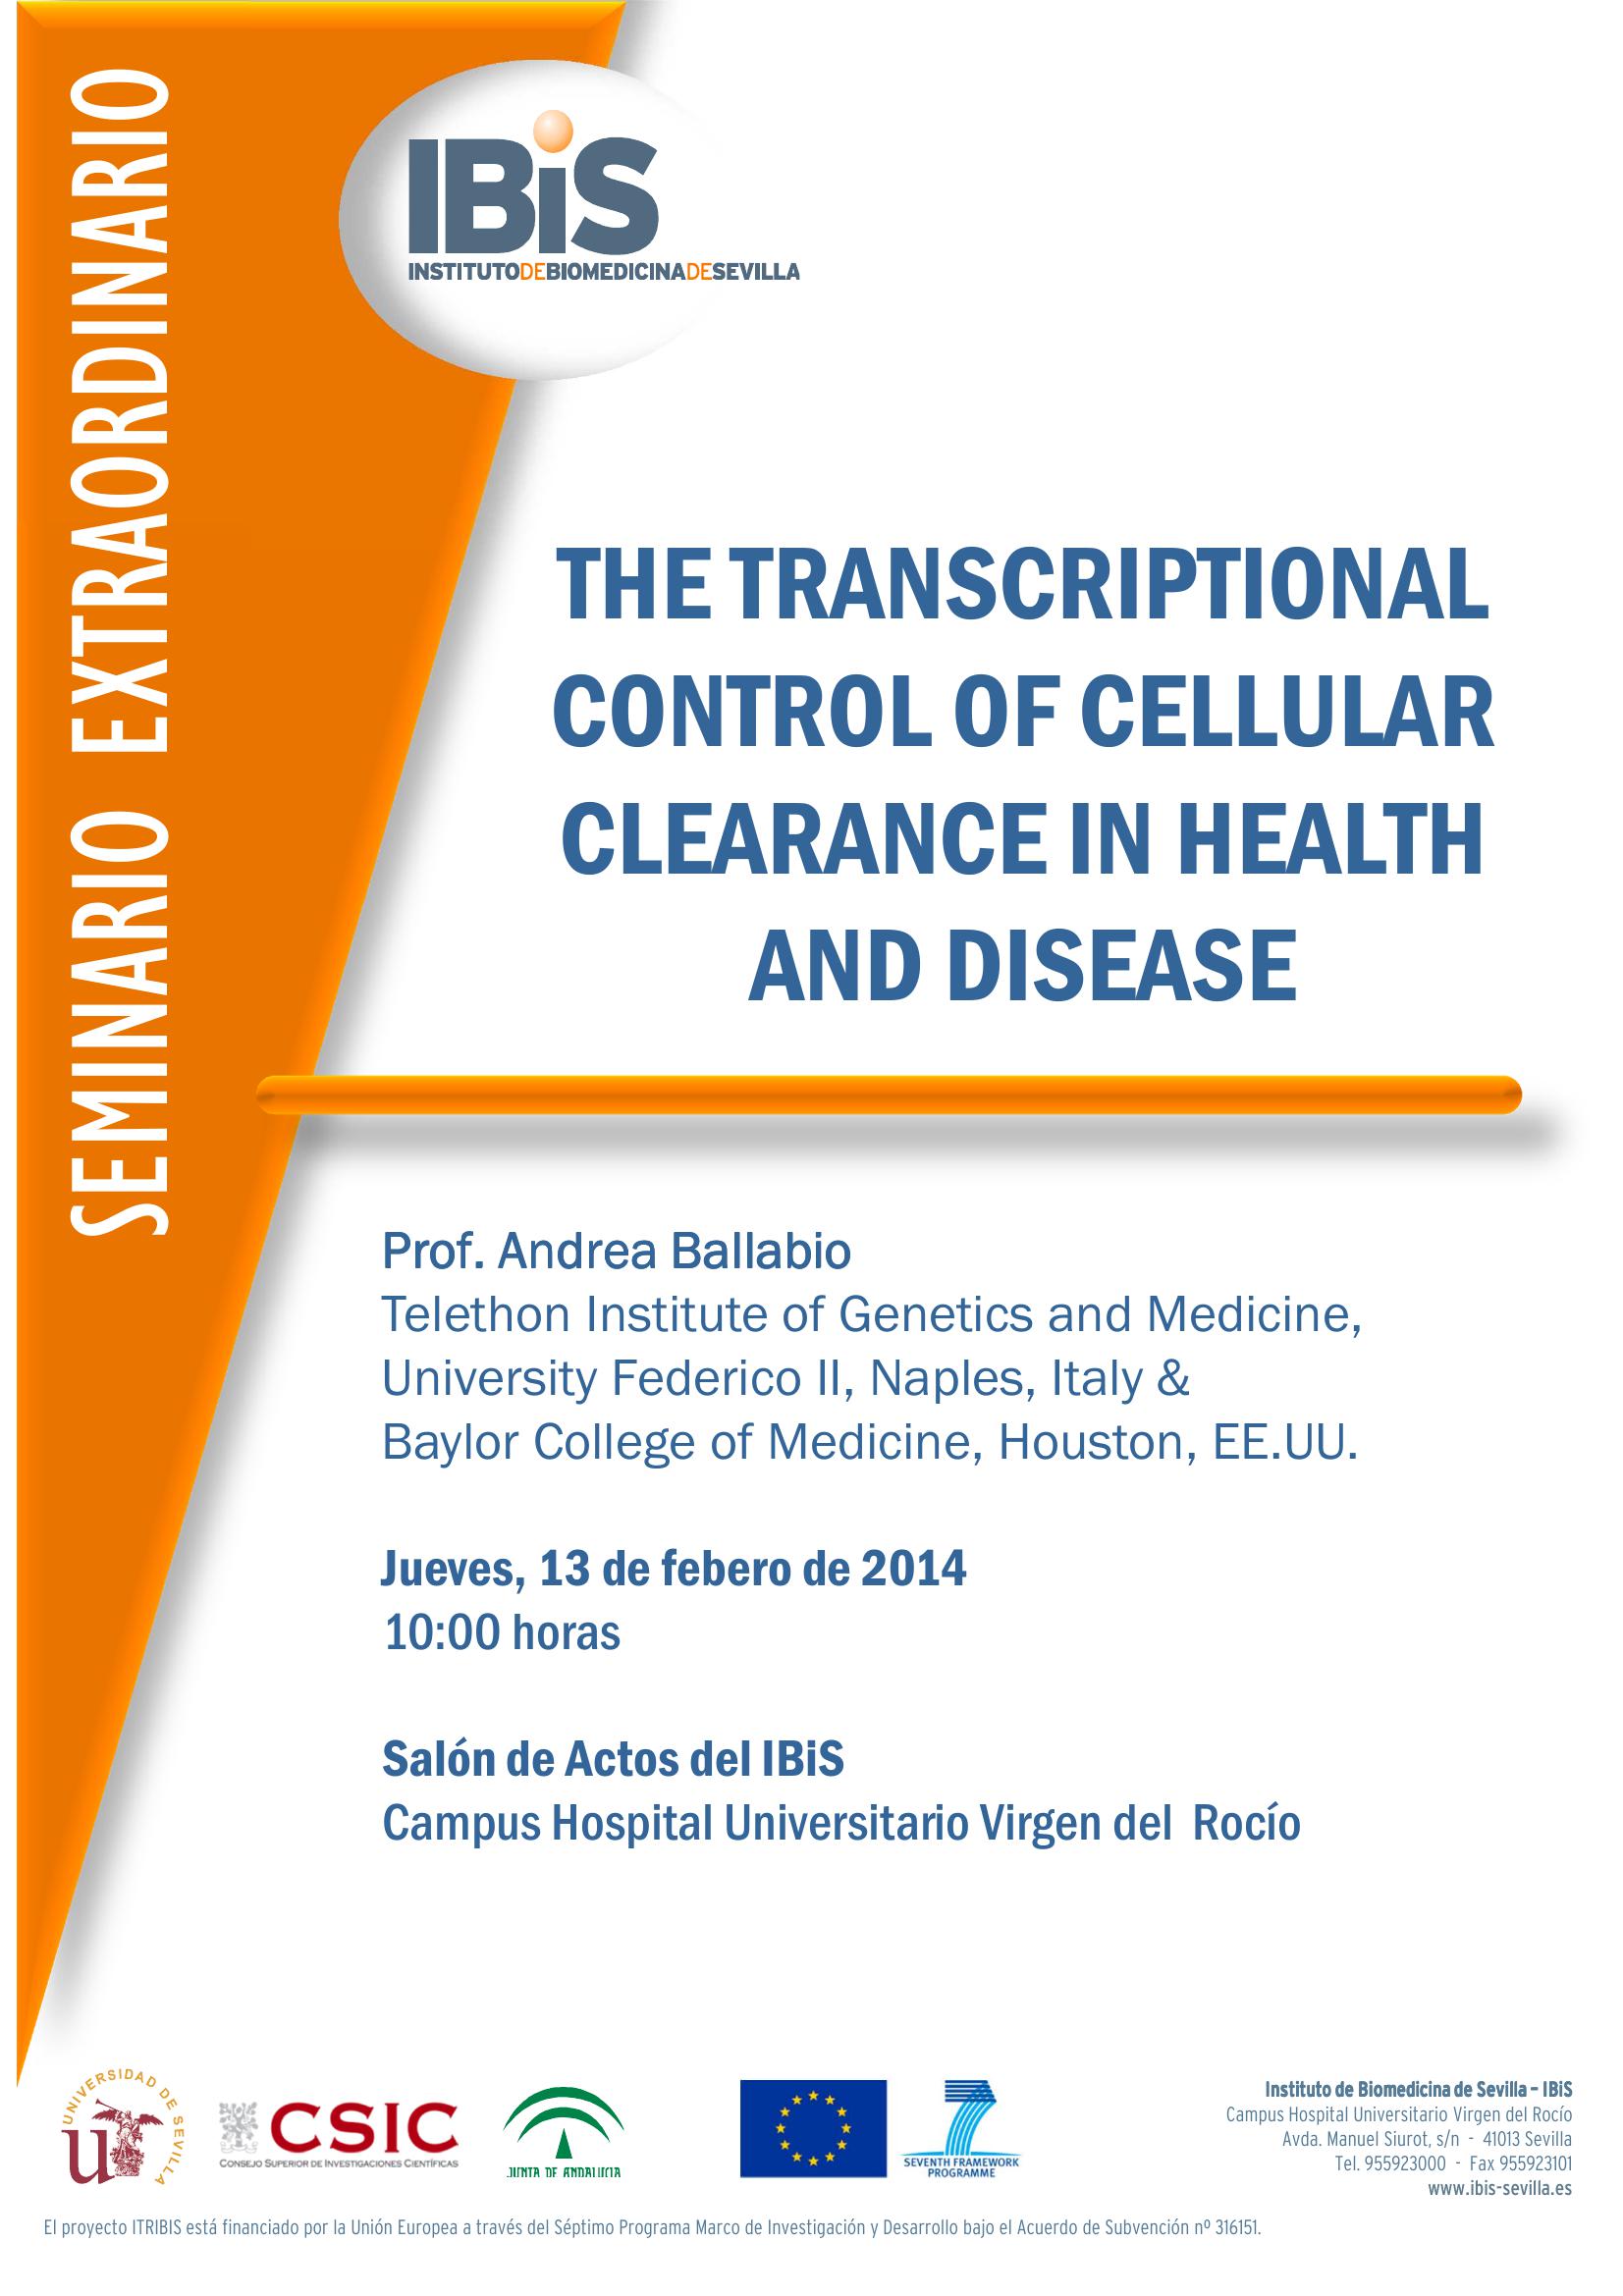 Poster: THE TRANSCRIPTIONAL CONTROL OF CELLULAR CLEARANCE IN HEALTH AND DISEASE